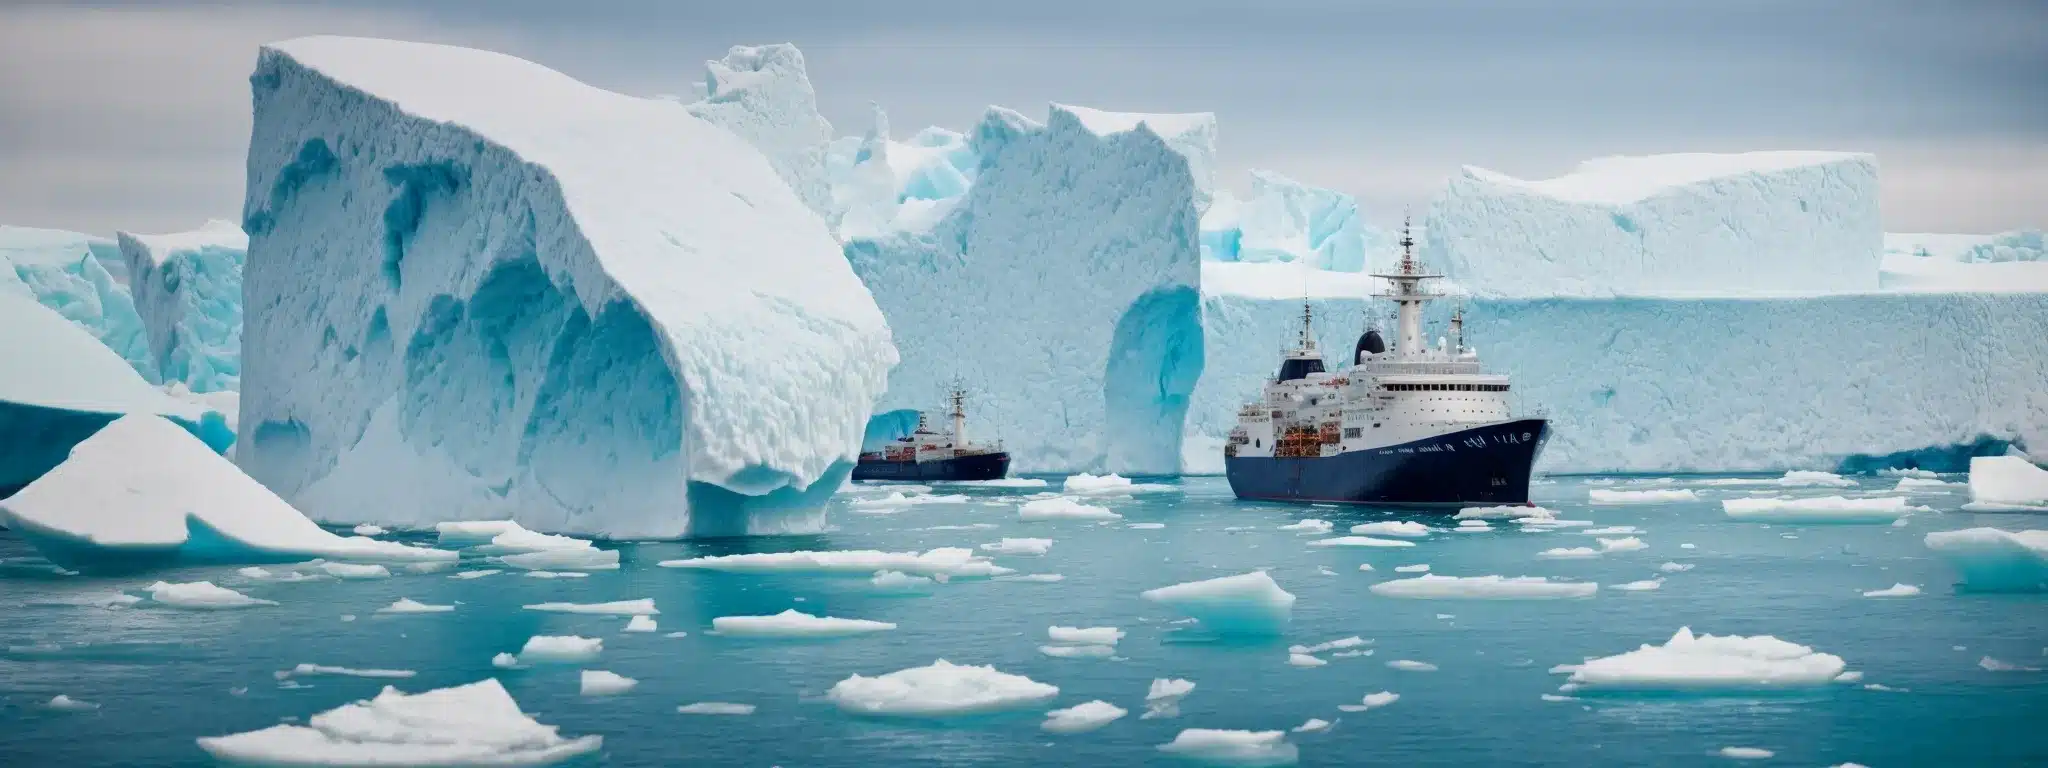 A Ship Carefully Maneuvers Through A Labyrinth Of Towering Icebergs Under A Clear Blue Sky.